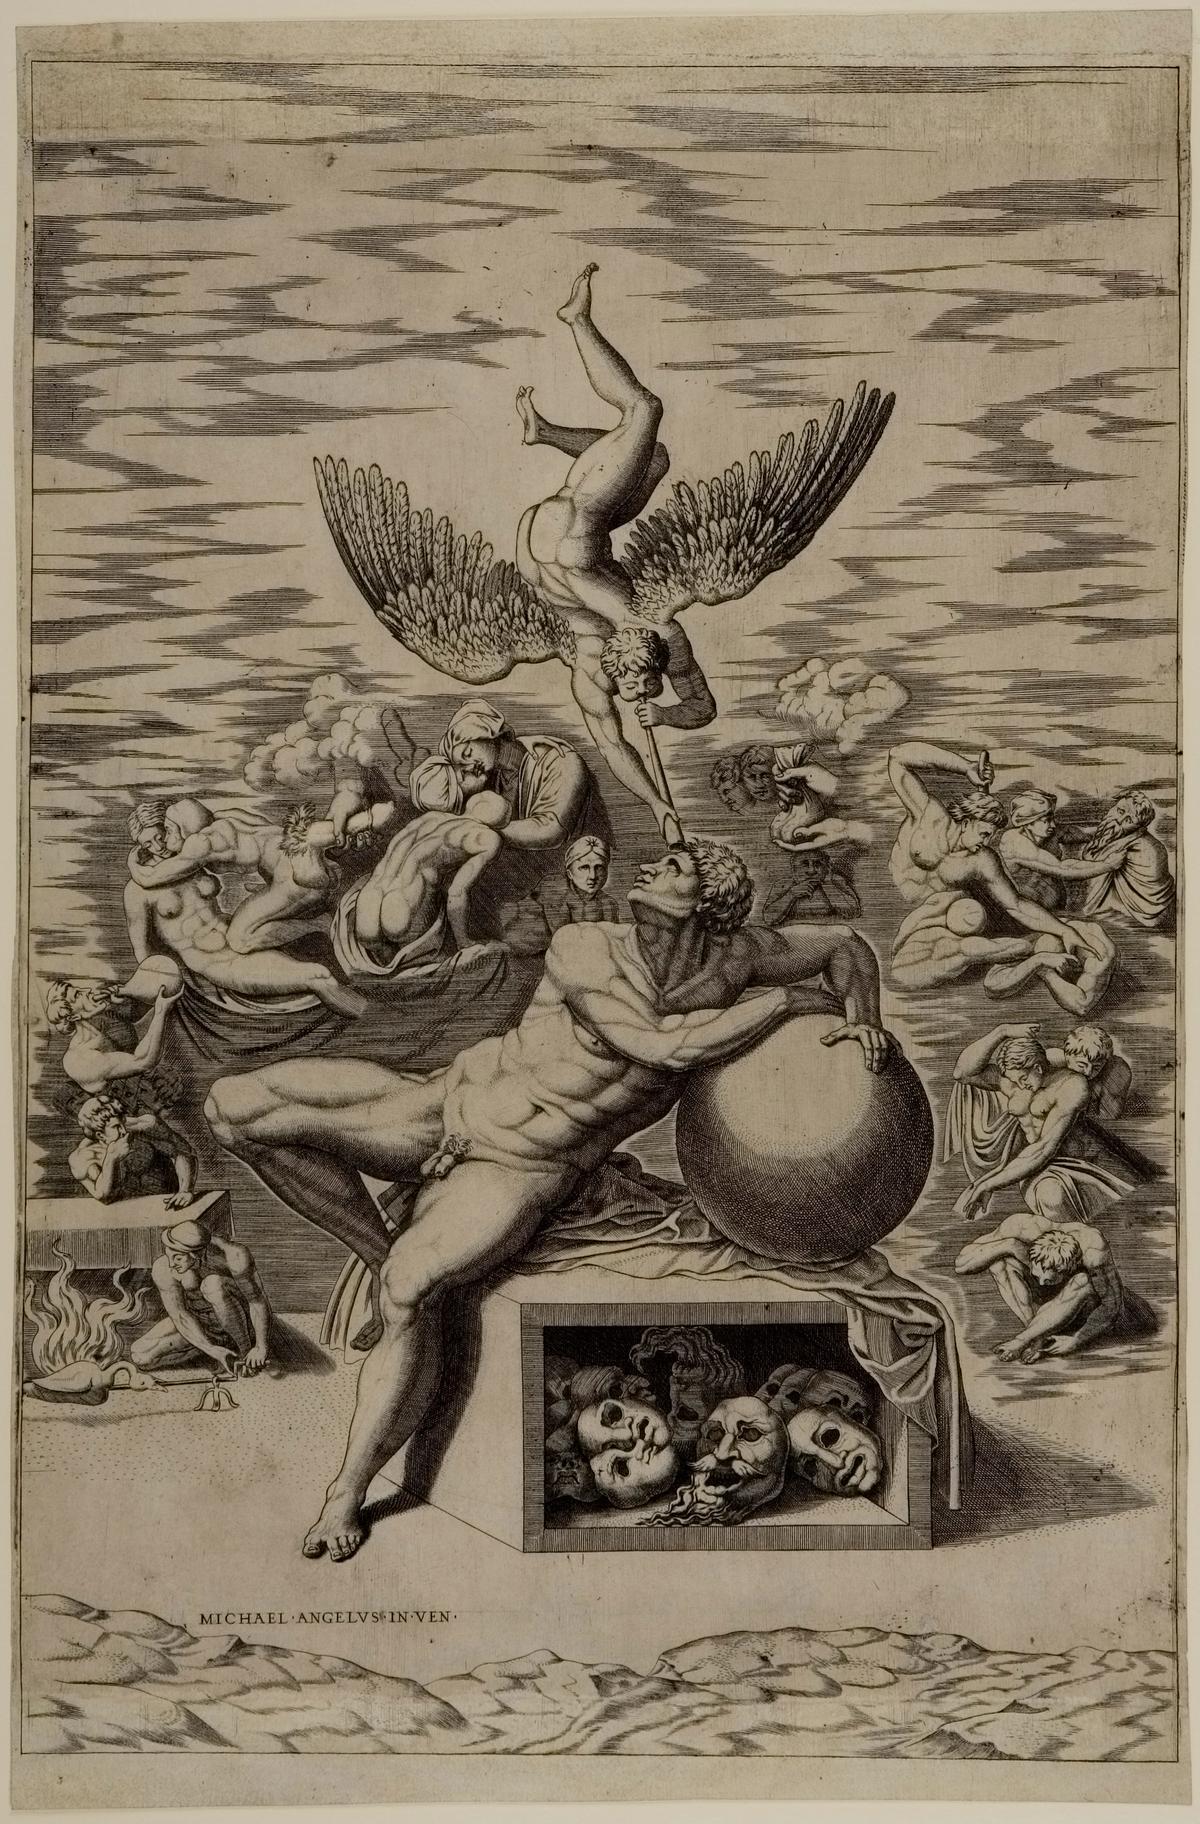 Unknown engraver after Michelangelo, The Dream of Human Life (around 1540) © President and Fellows of Harvard College